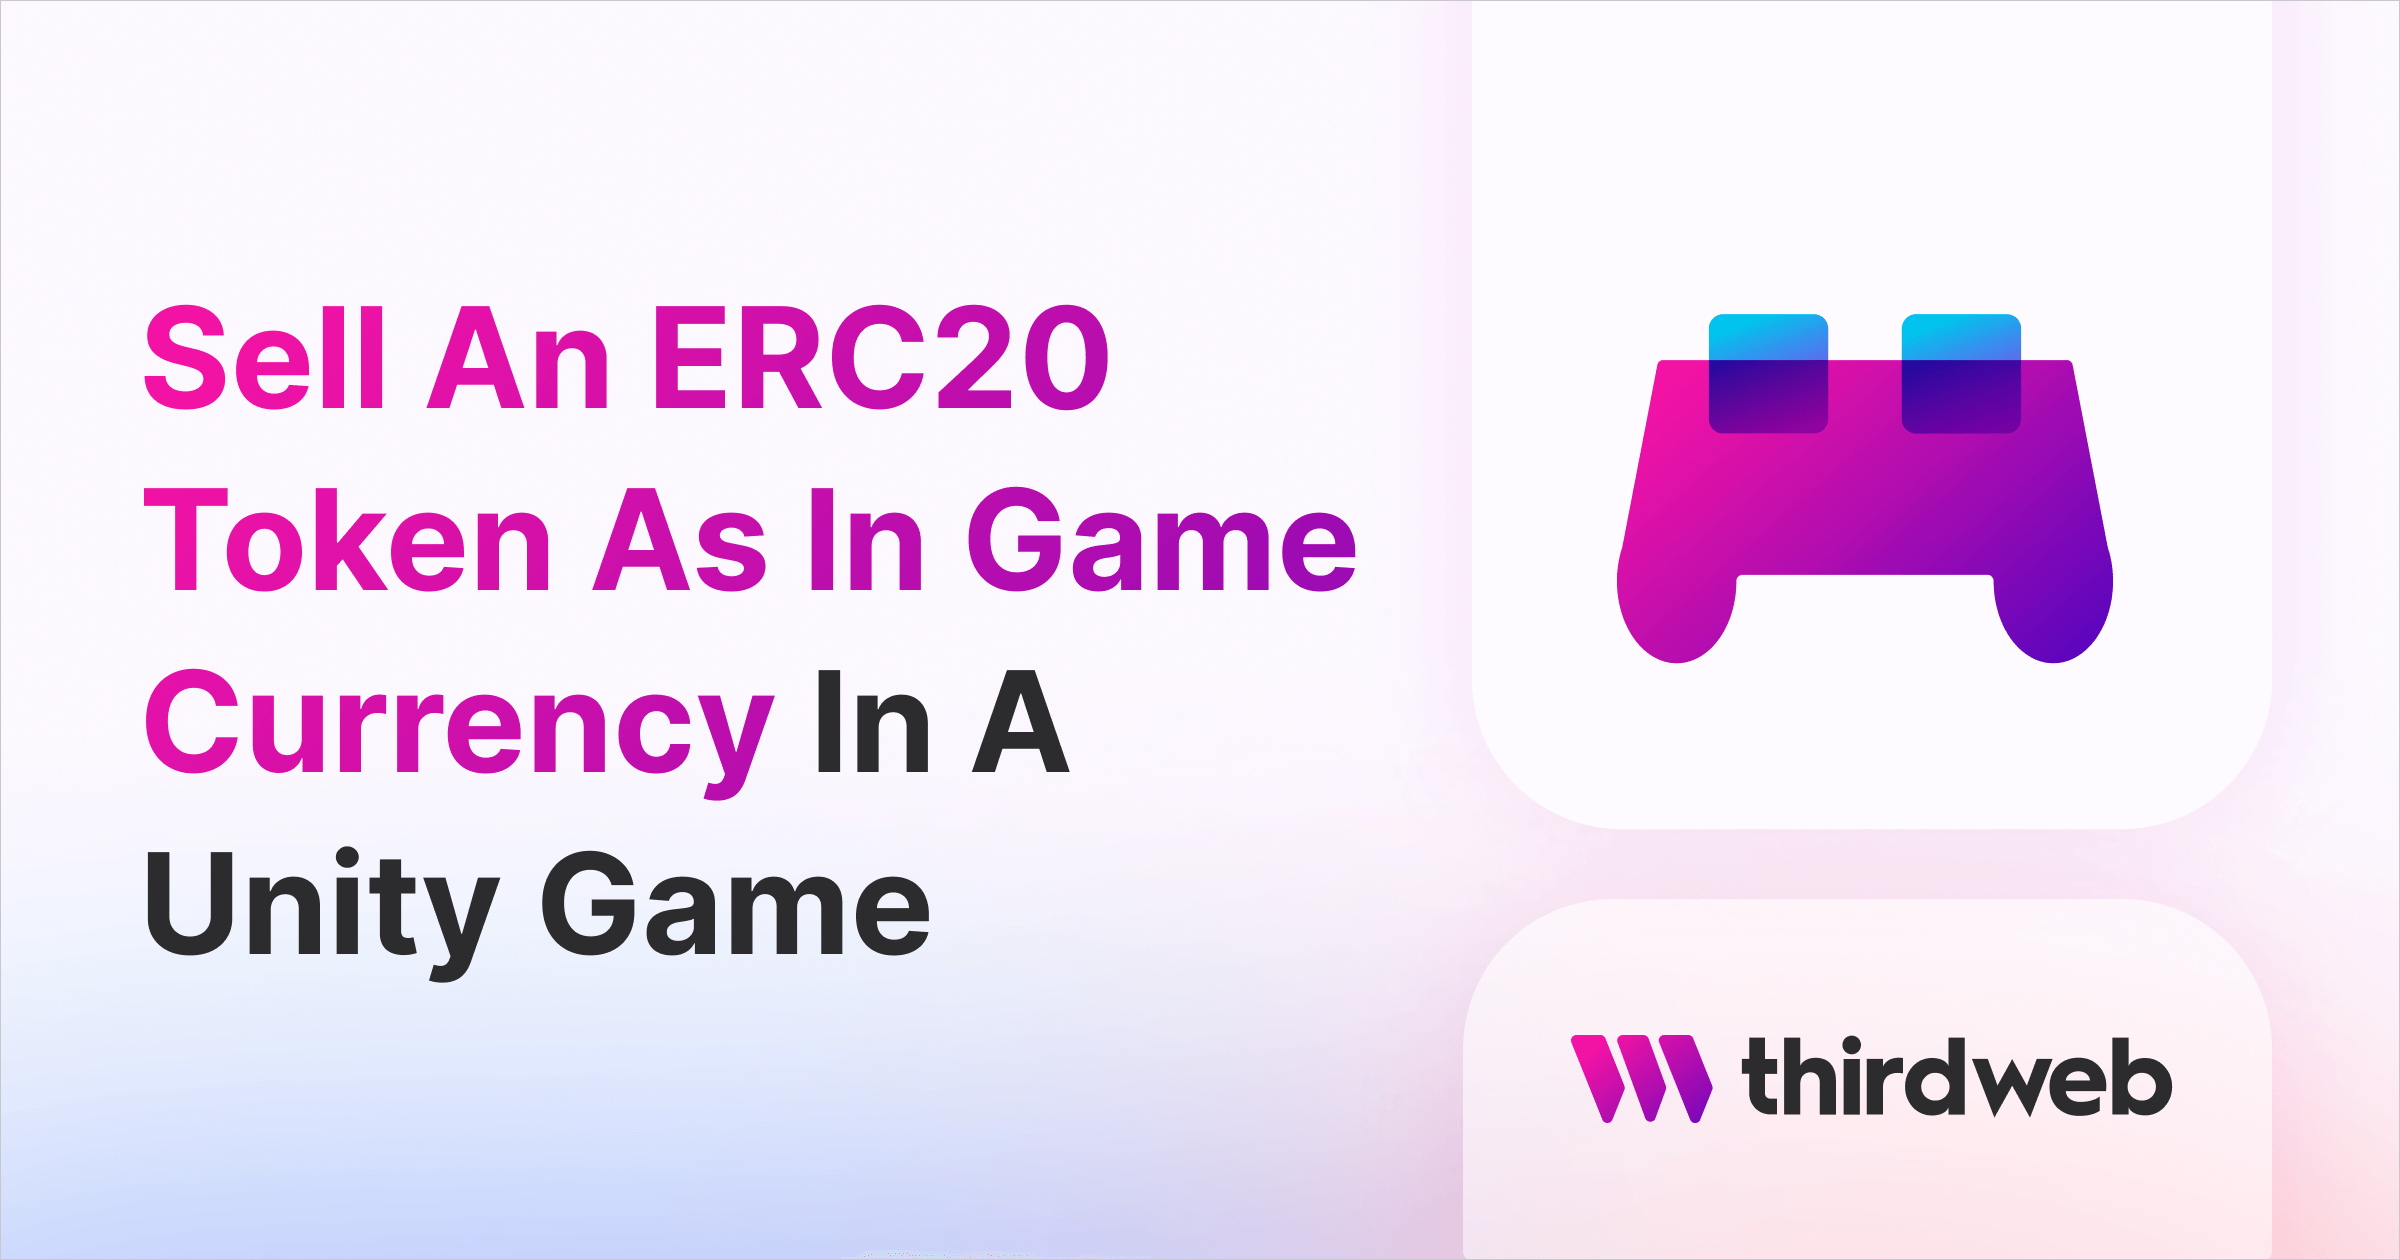 Sell An ERC20 Token As In-Game Currency In Unity - thirdweb Guides